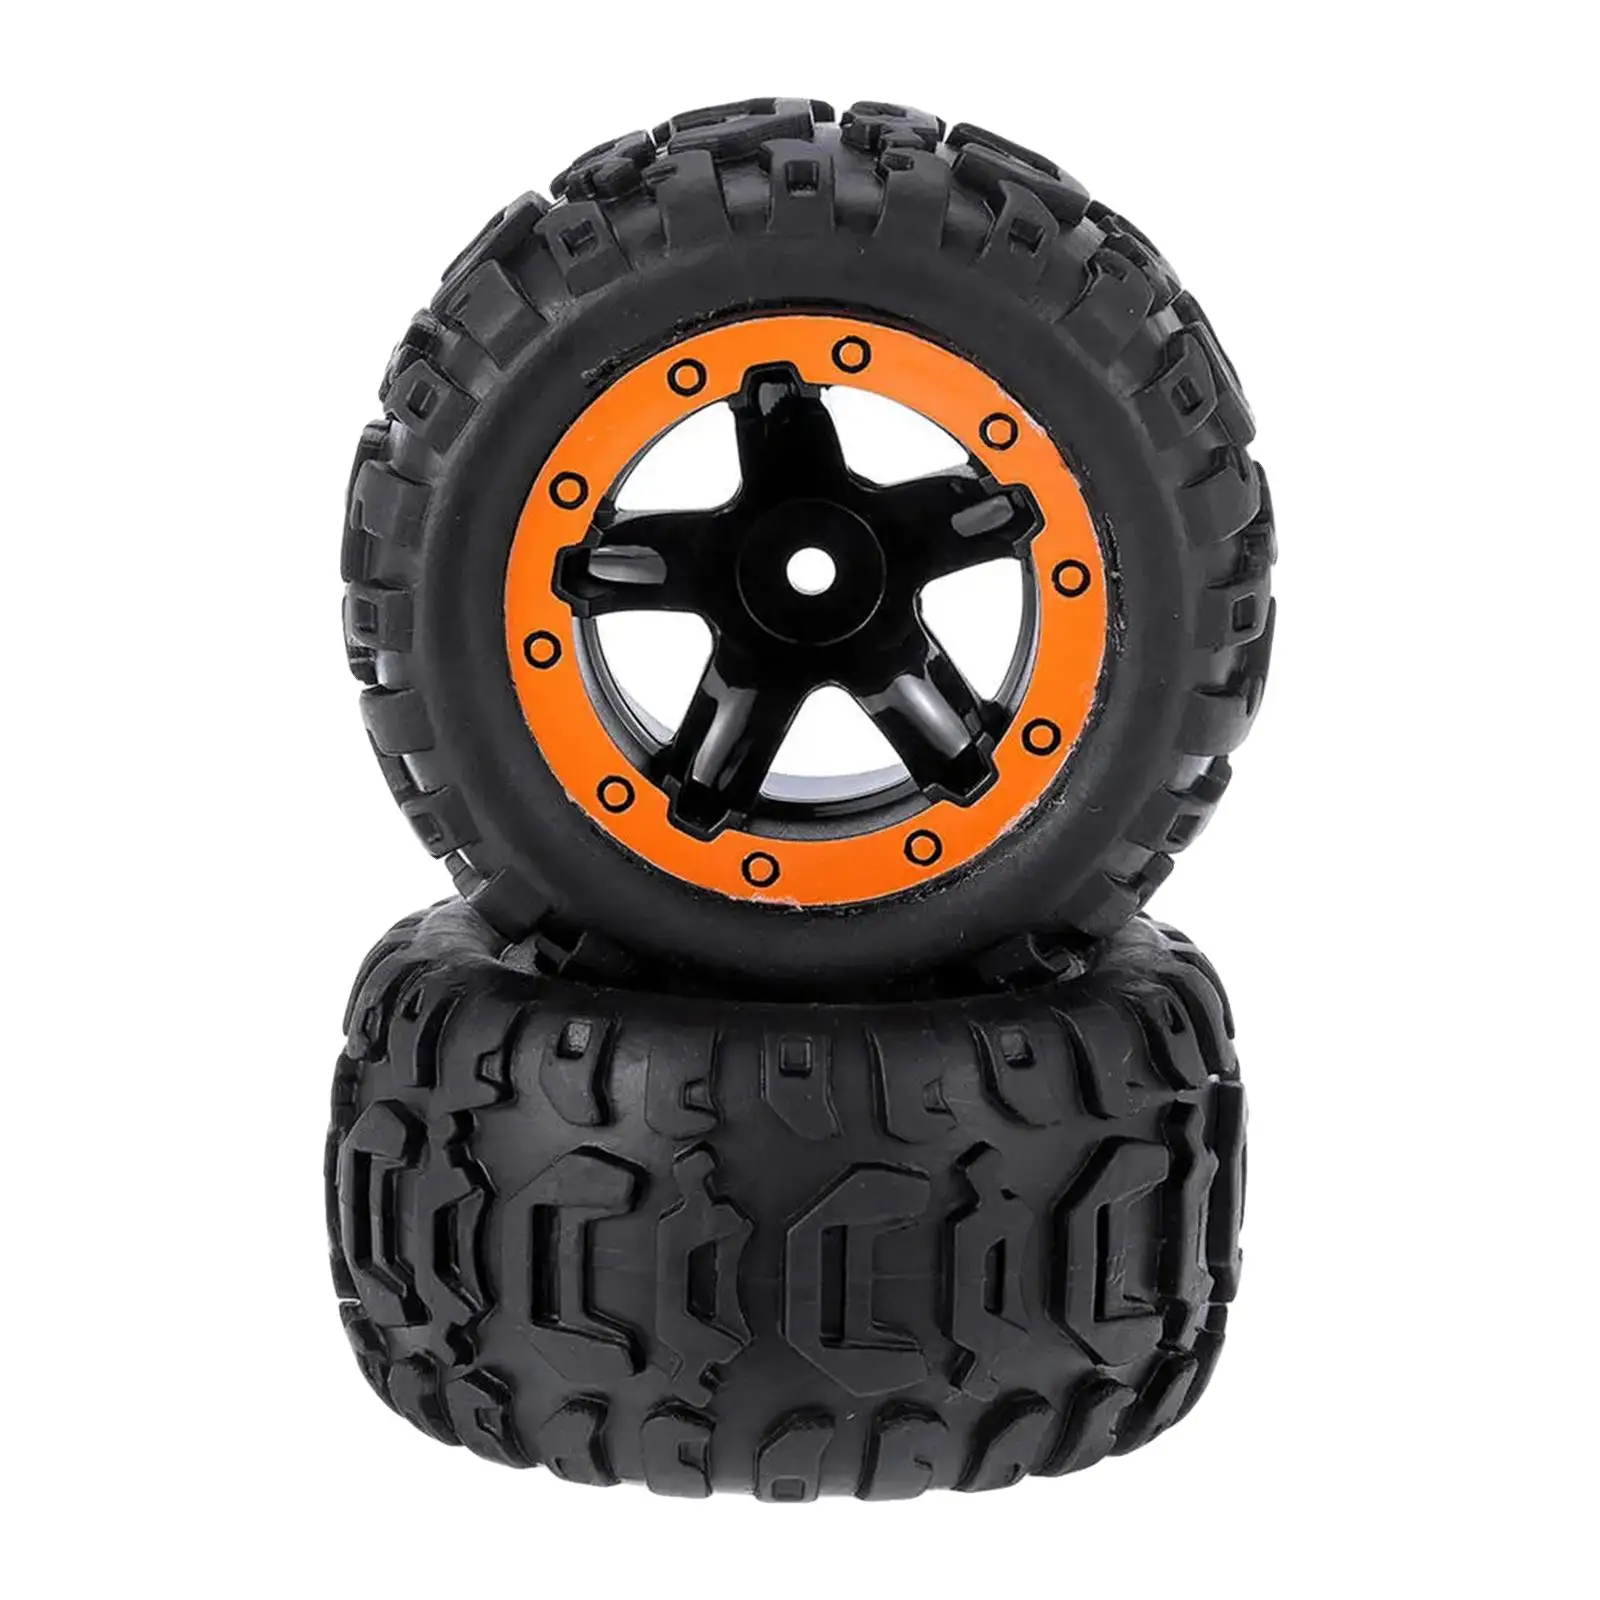 2 Pieces RC Wheels Tires Replacements for HBX 16889 Trucks RC 